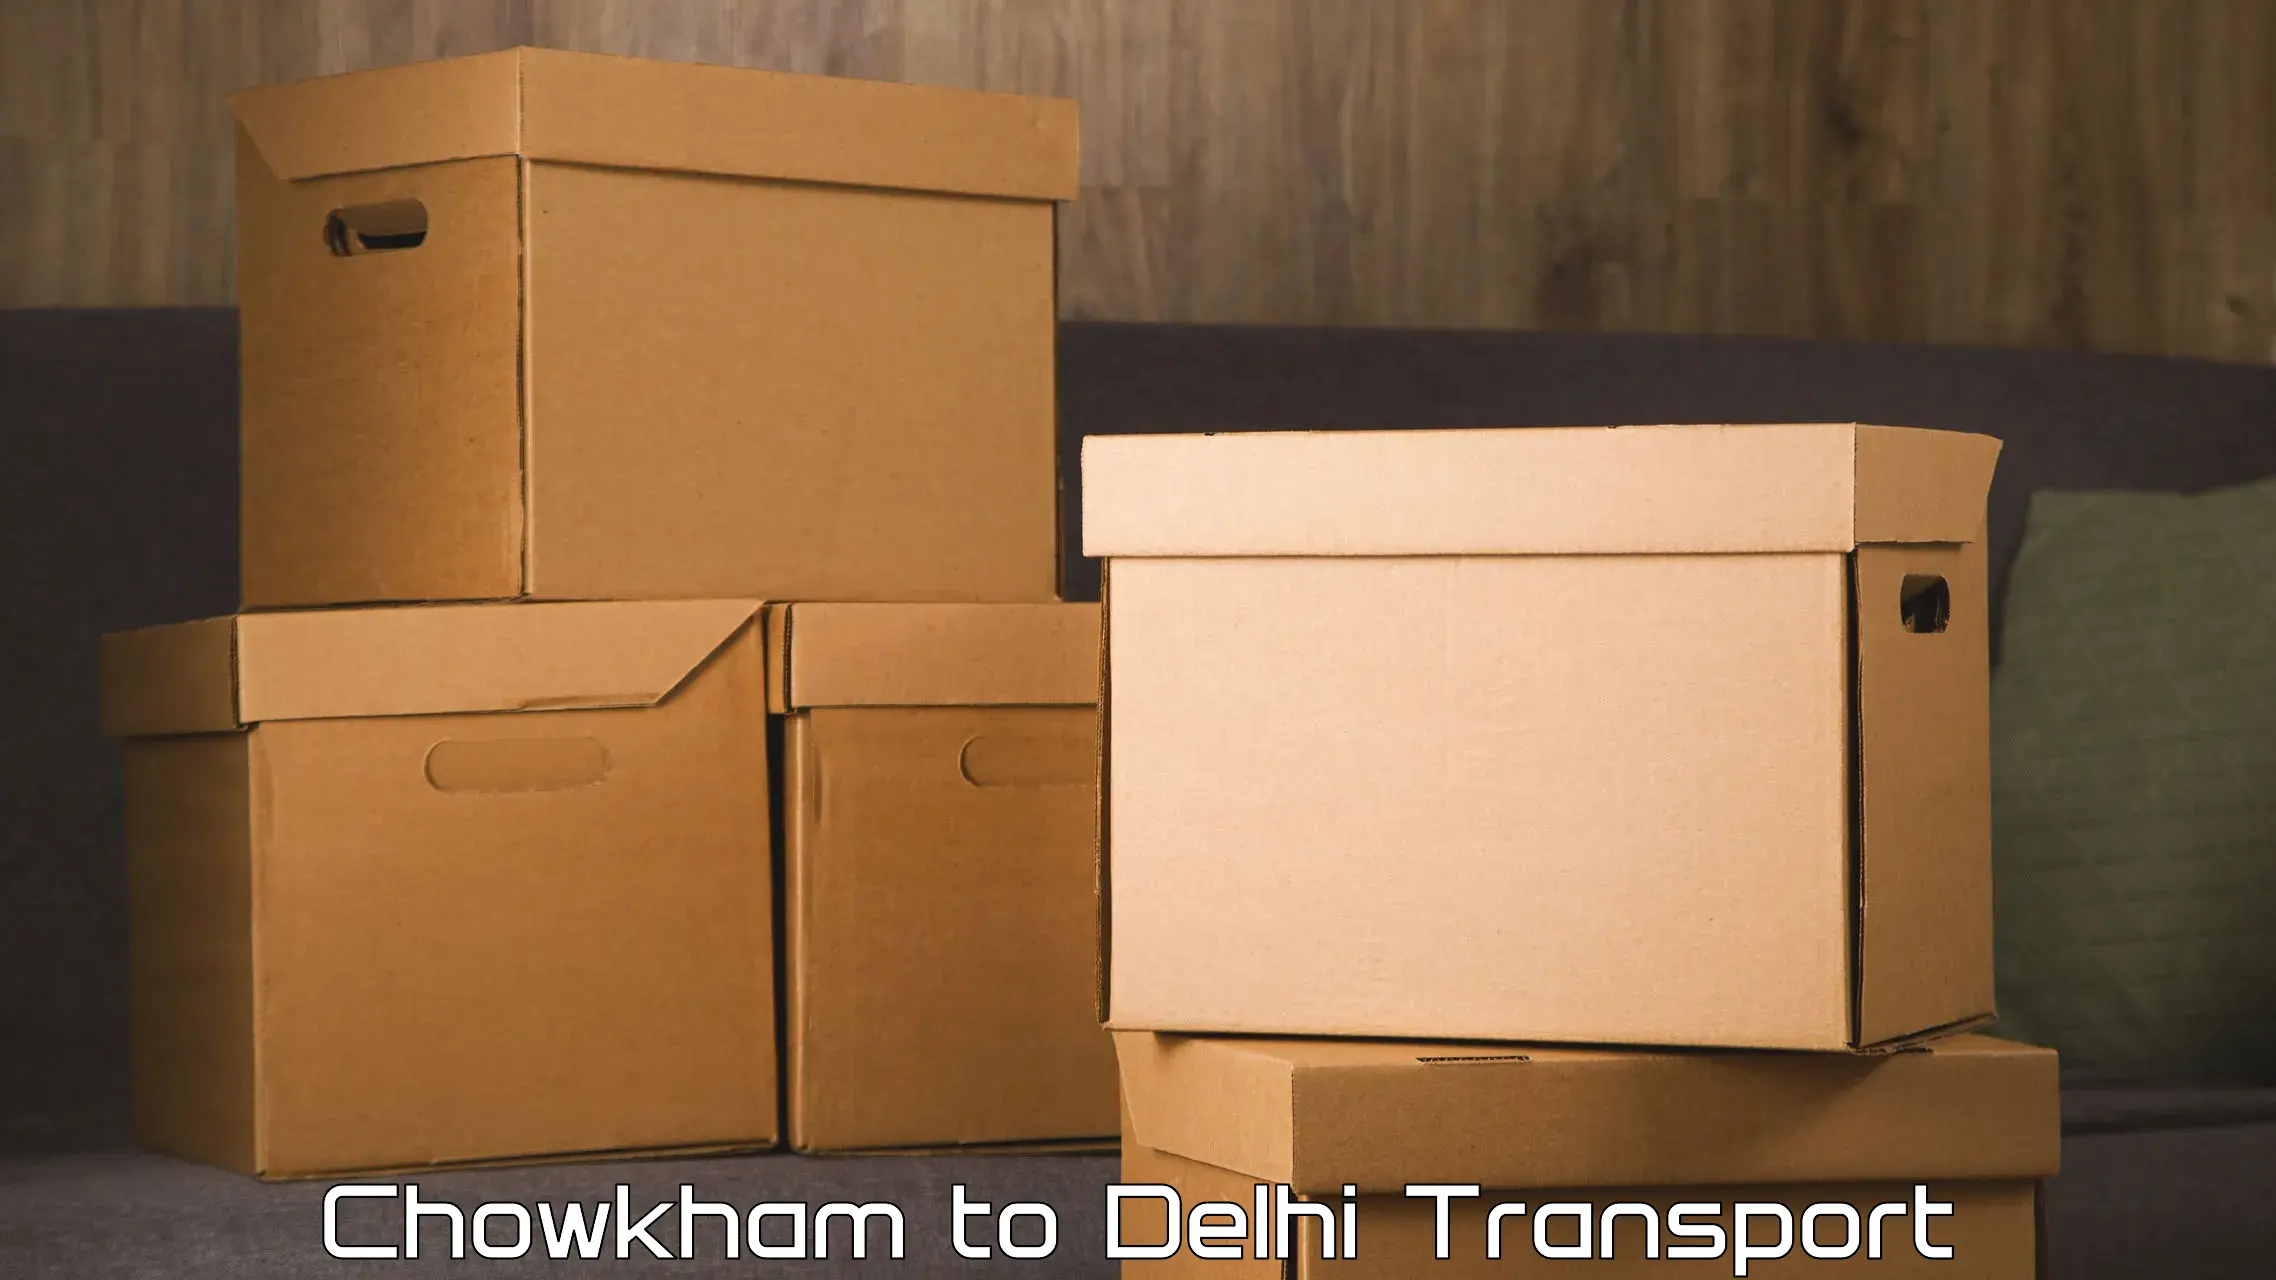 Pick up transport service Chowkham to NCR